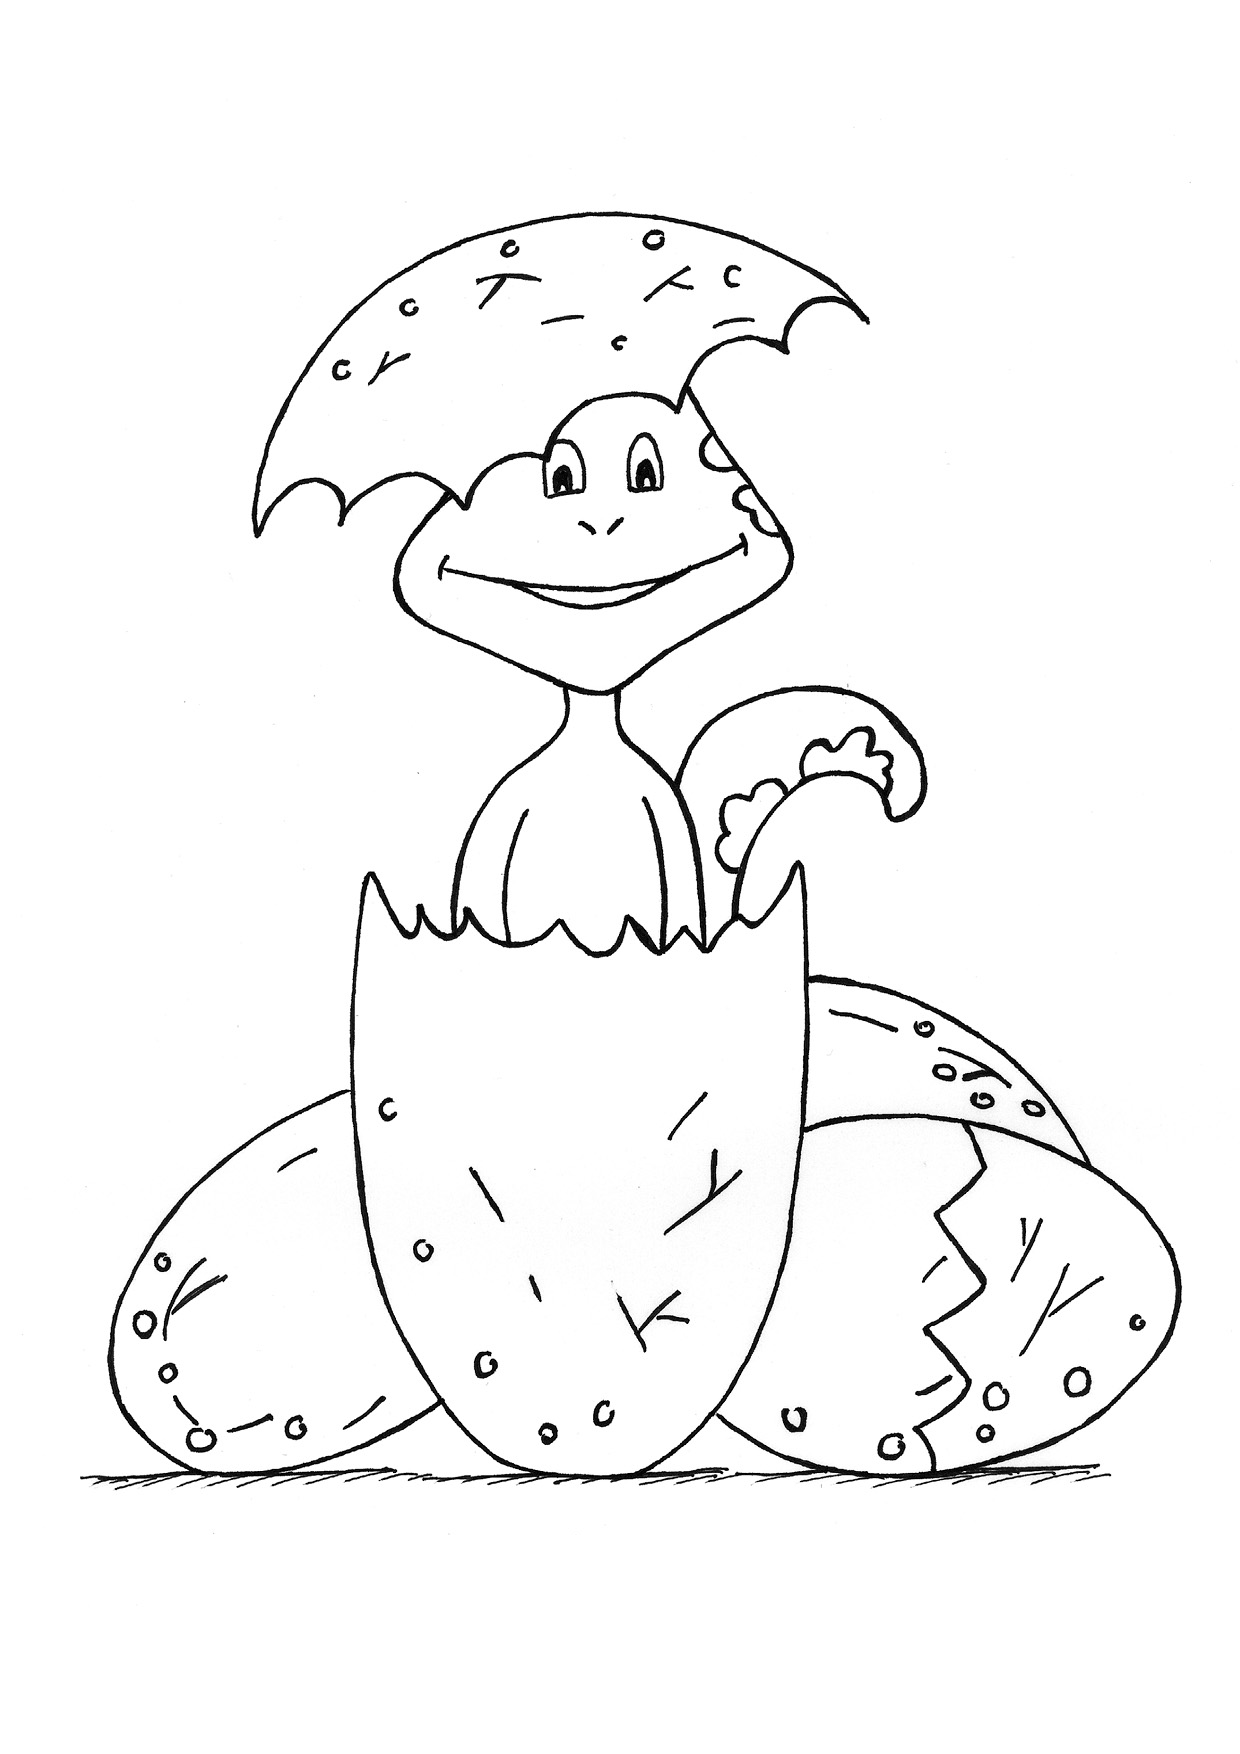 Cute Dinosaur Coloring Pages Printable | Cooloring.com